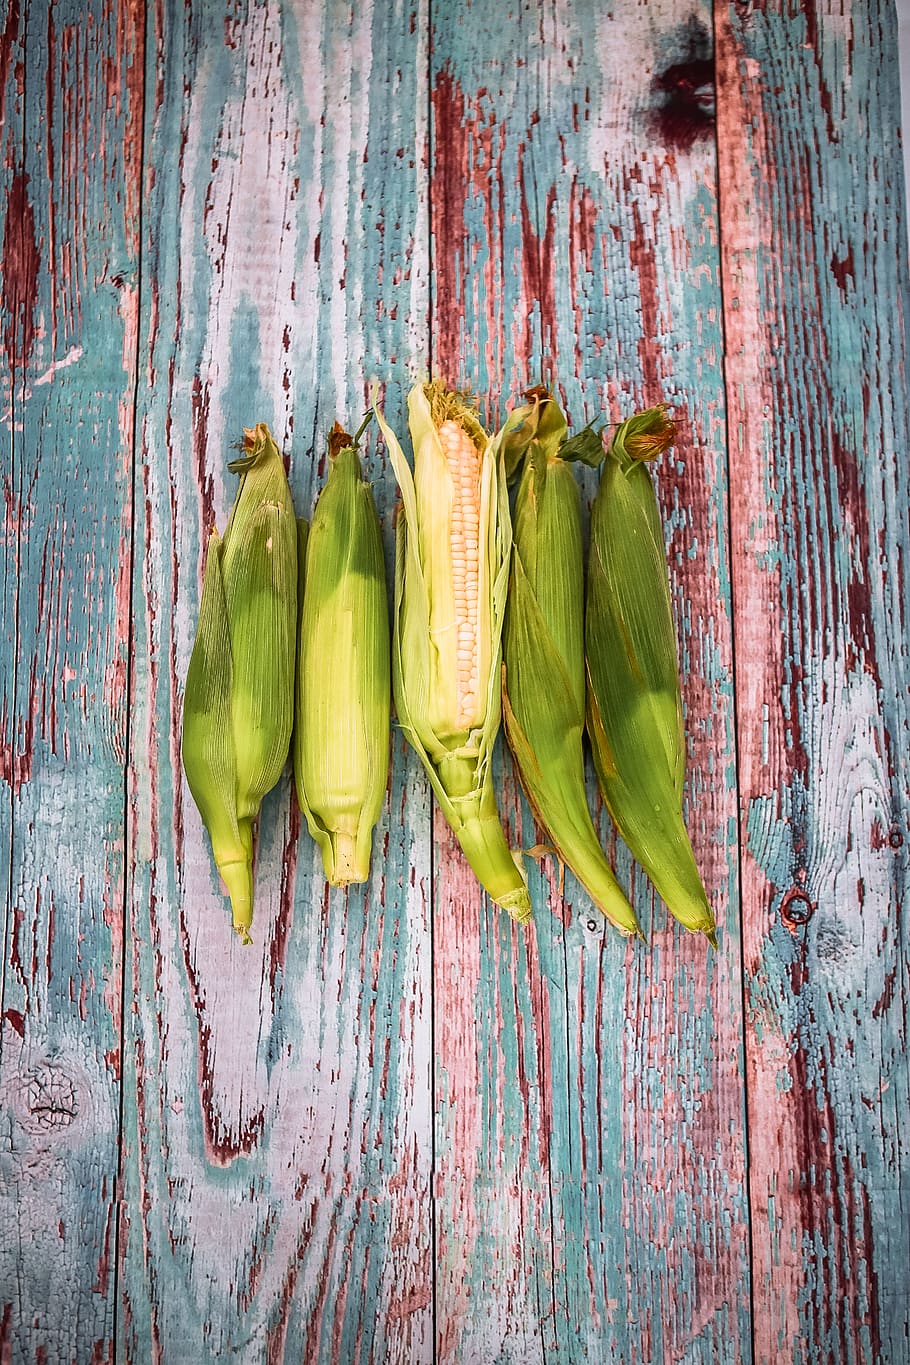 green corns on wooden surface, plant, food, vegetable, farm, produce